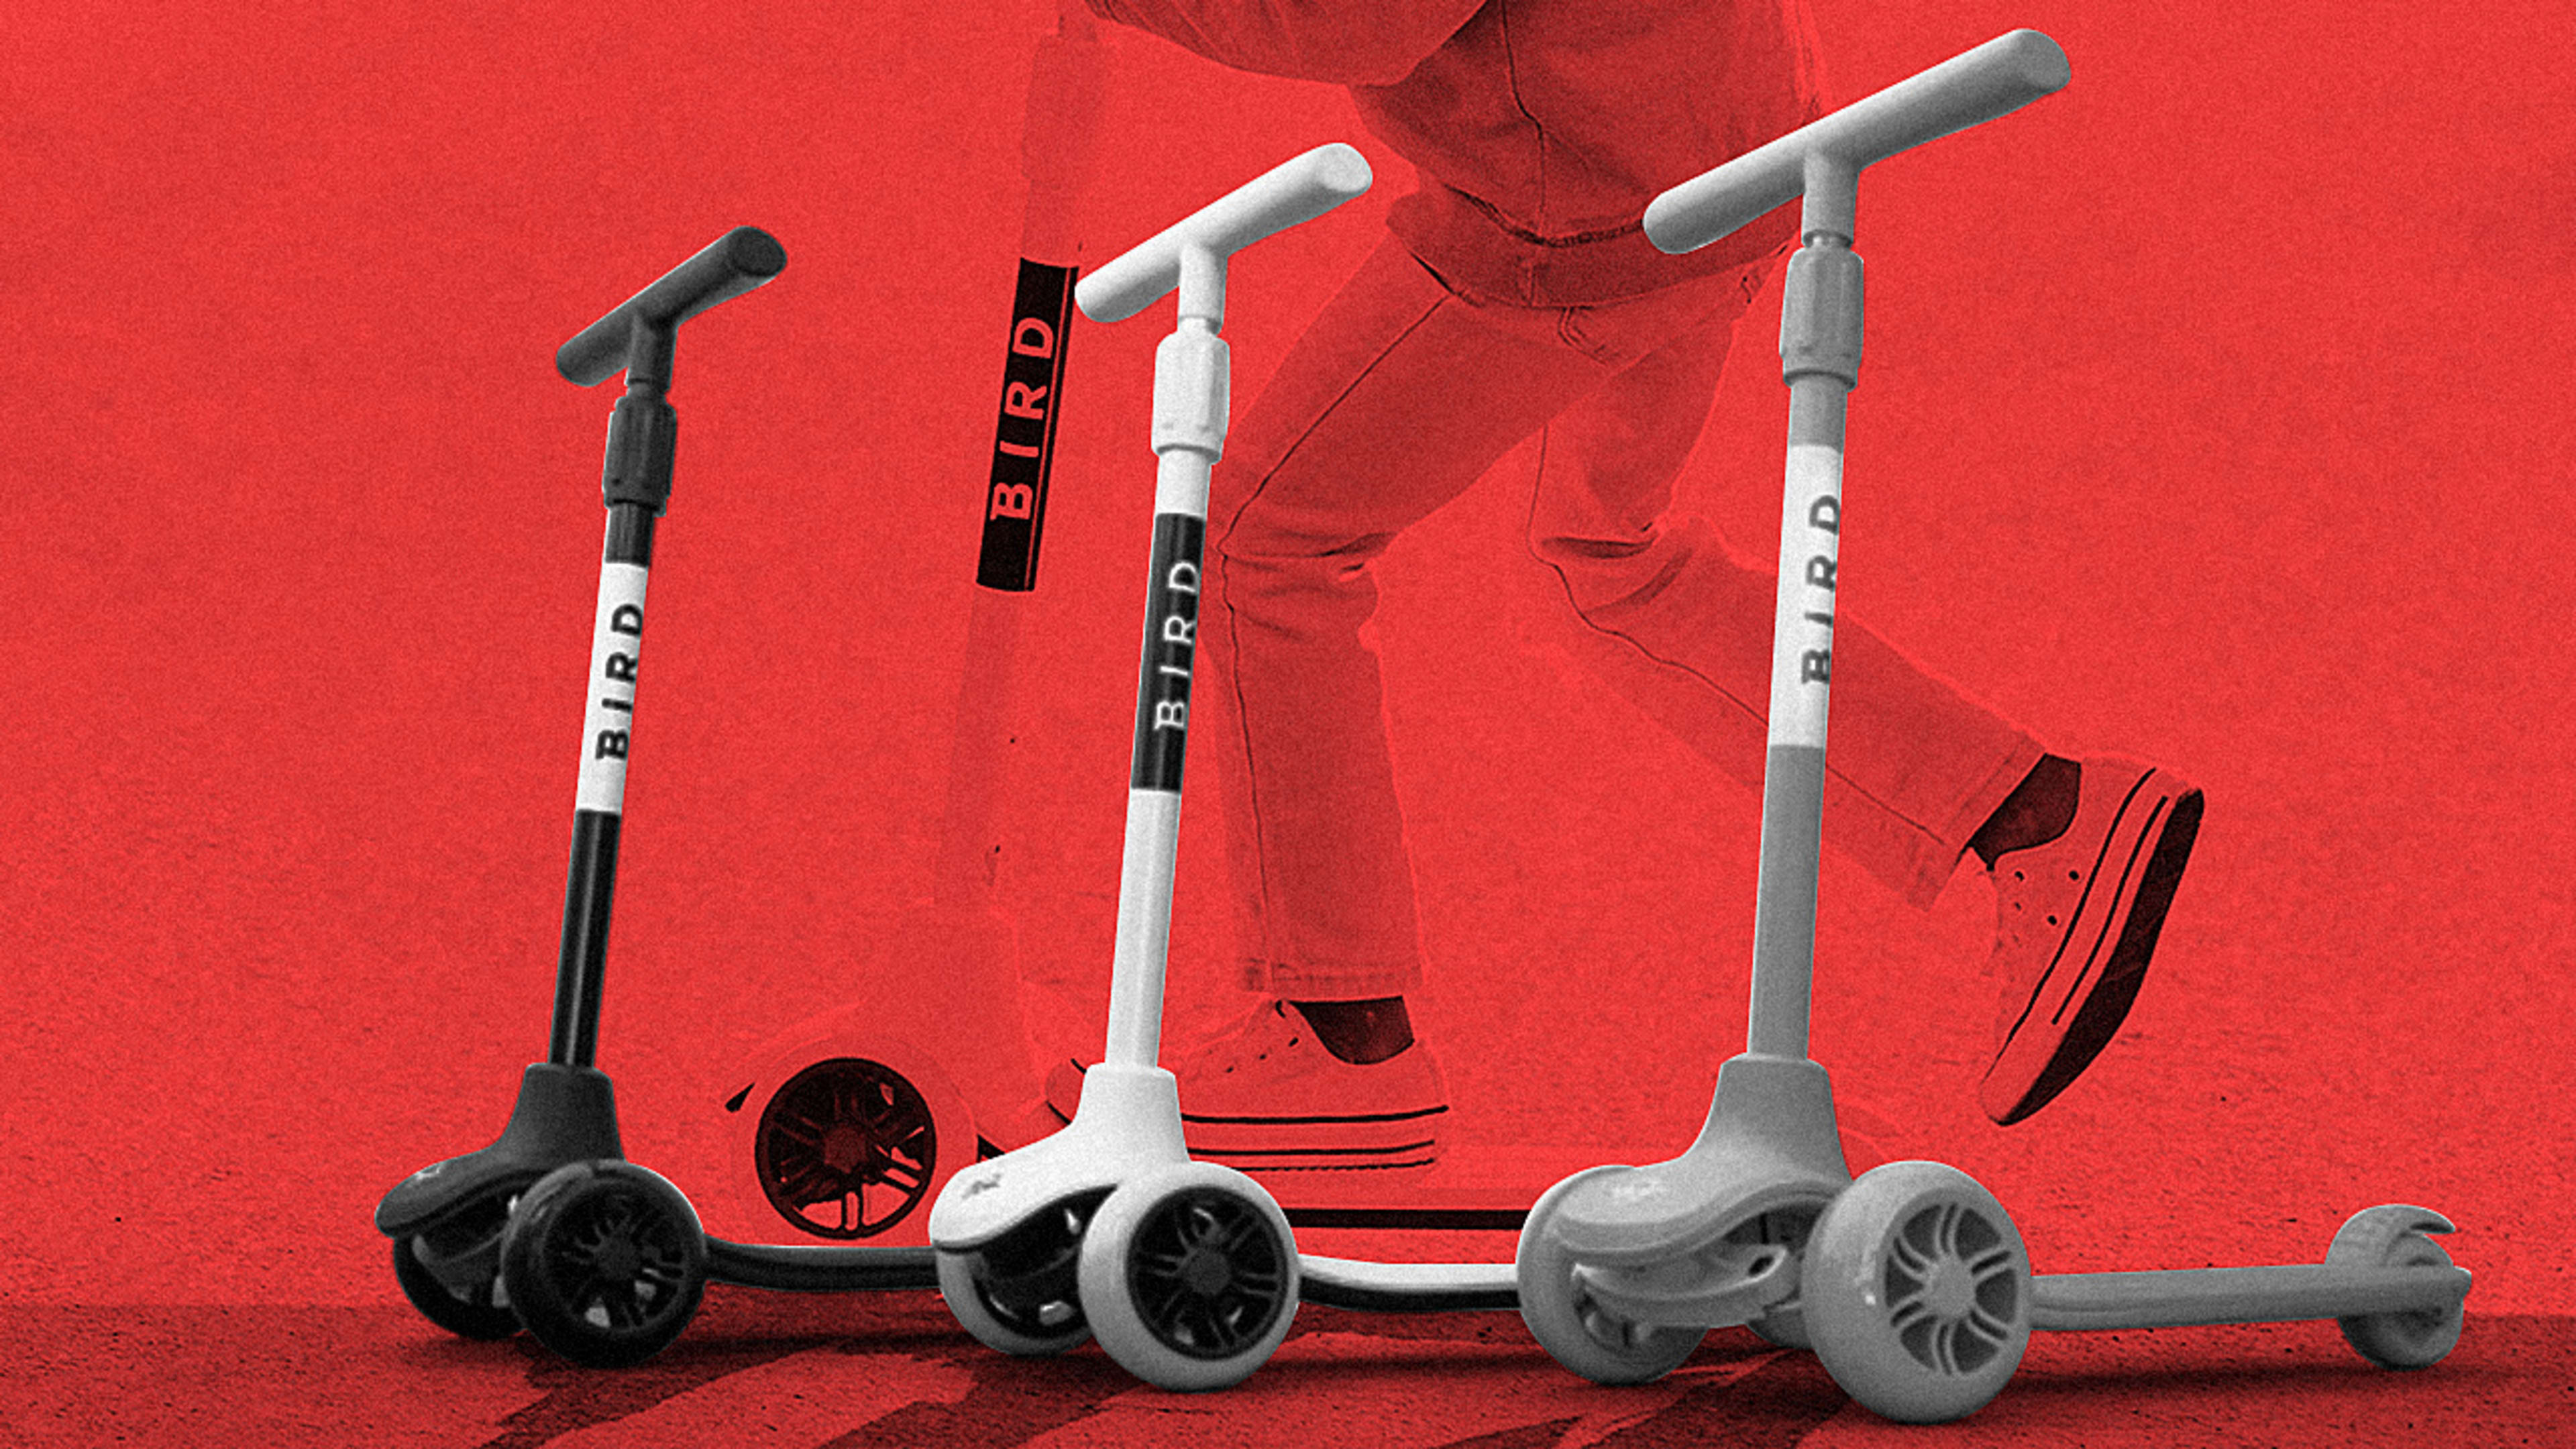 Oh no, Bird is selling a kid’s version of its ubiquitous scooters